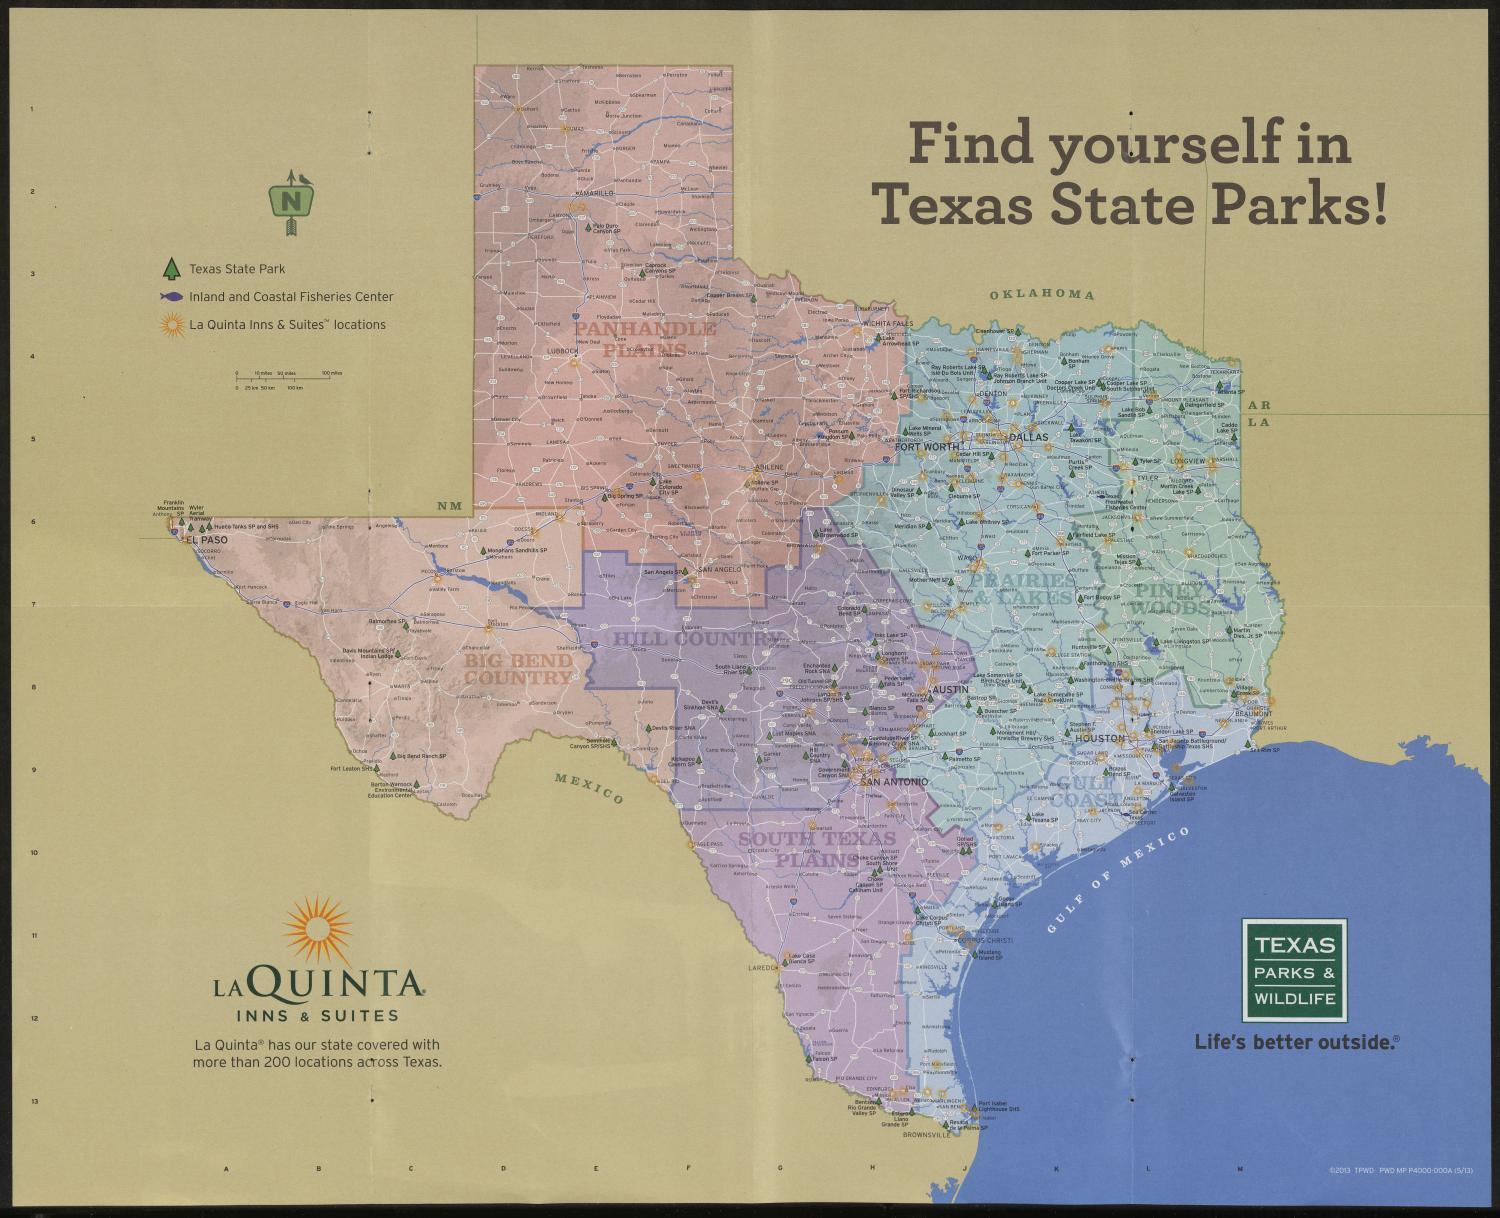 Texas State Park Map, 2013 Side 1 of 2 The Portal to Texas History